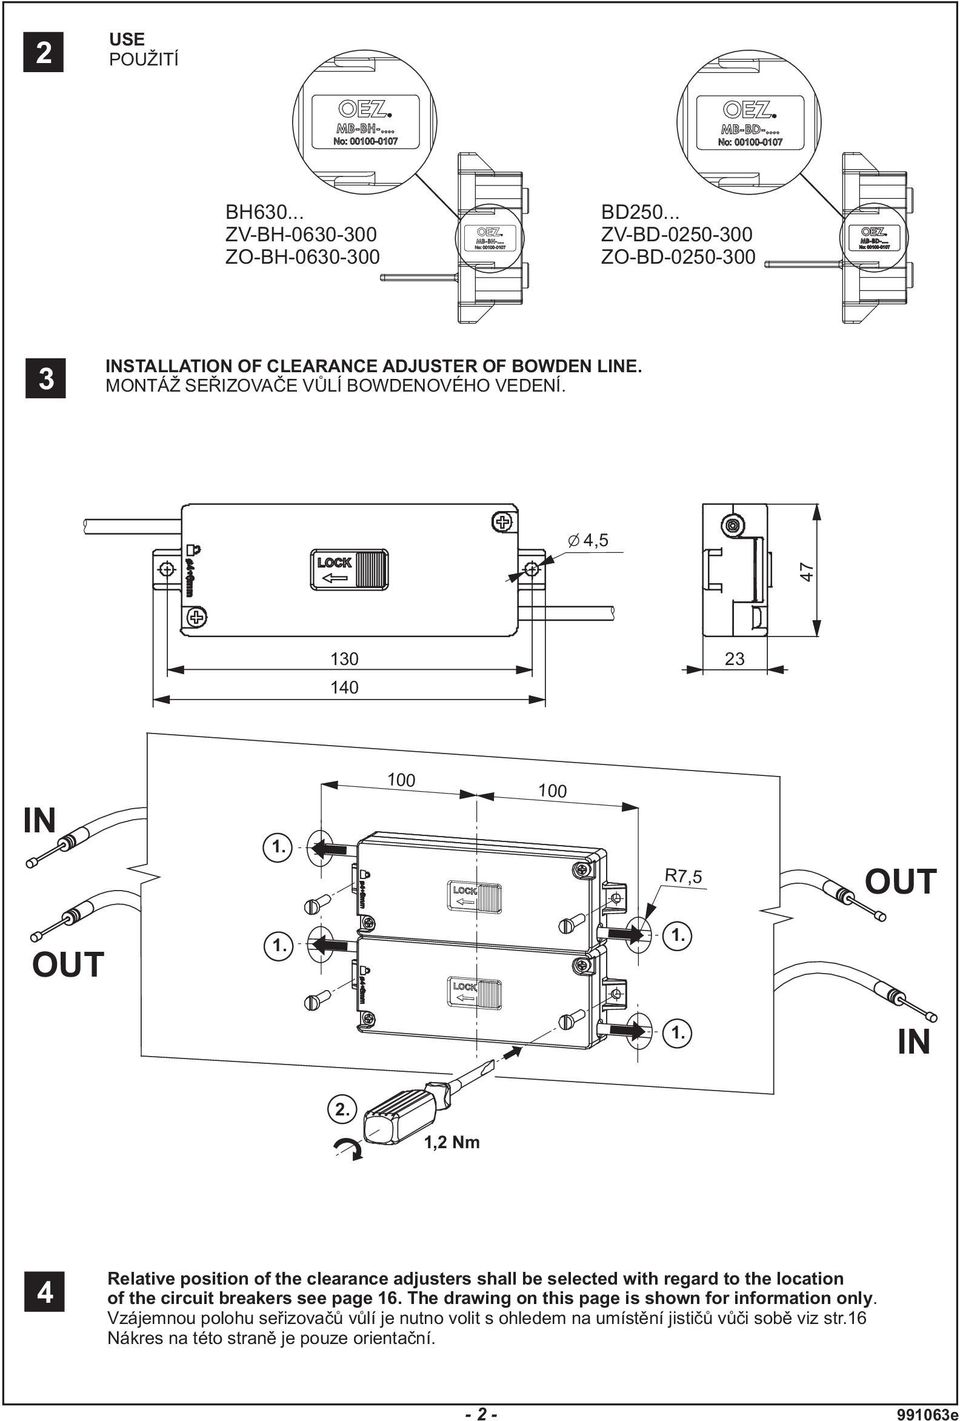 1,2 Nm 4 Relative position of the clearance adjusters shall be selected with regard to the location of the circuit breakers see page 16.